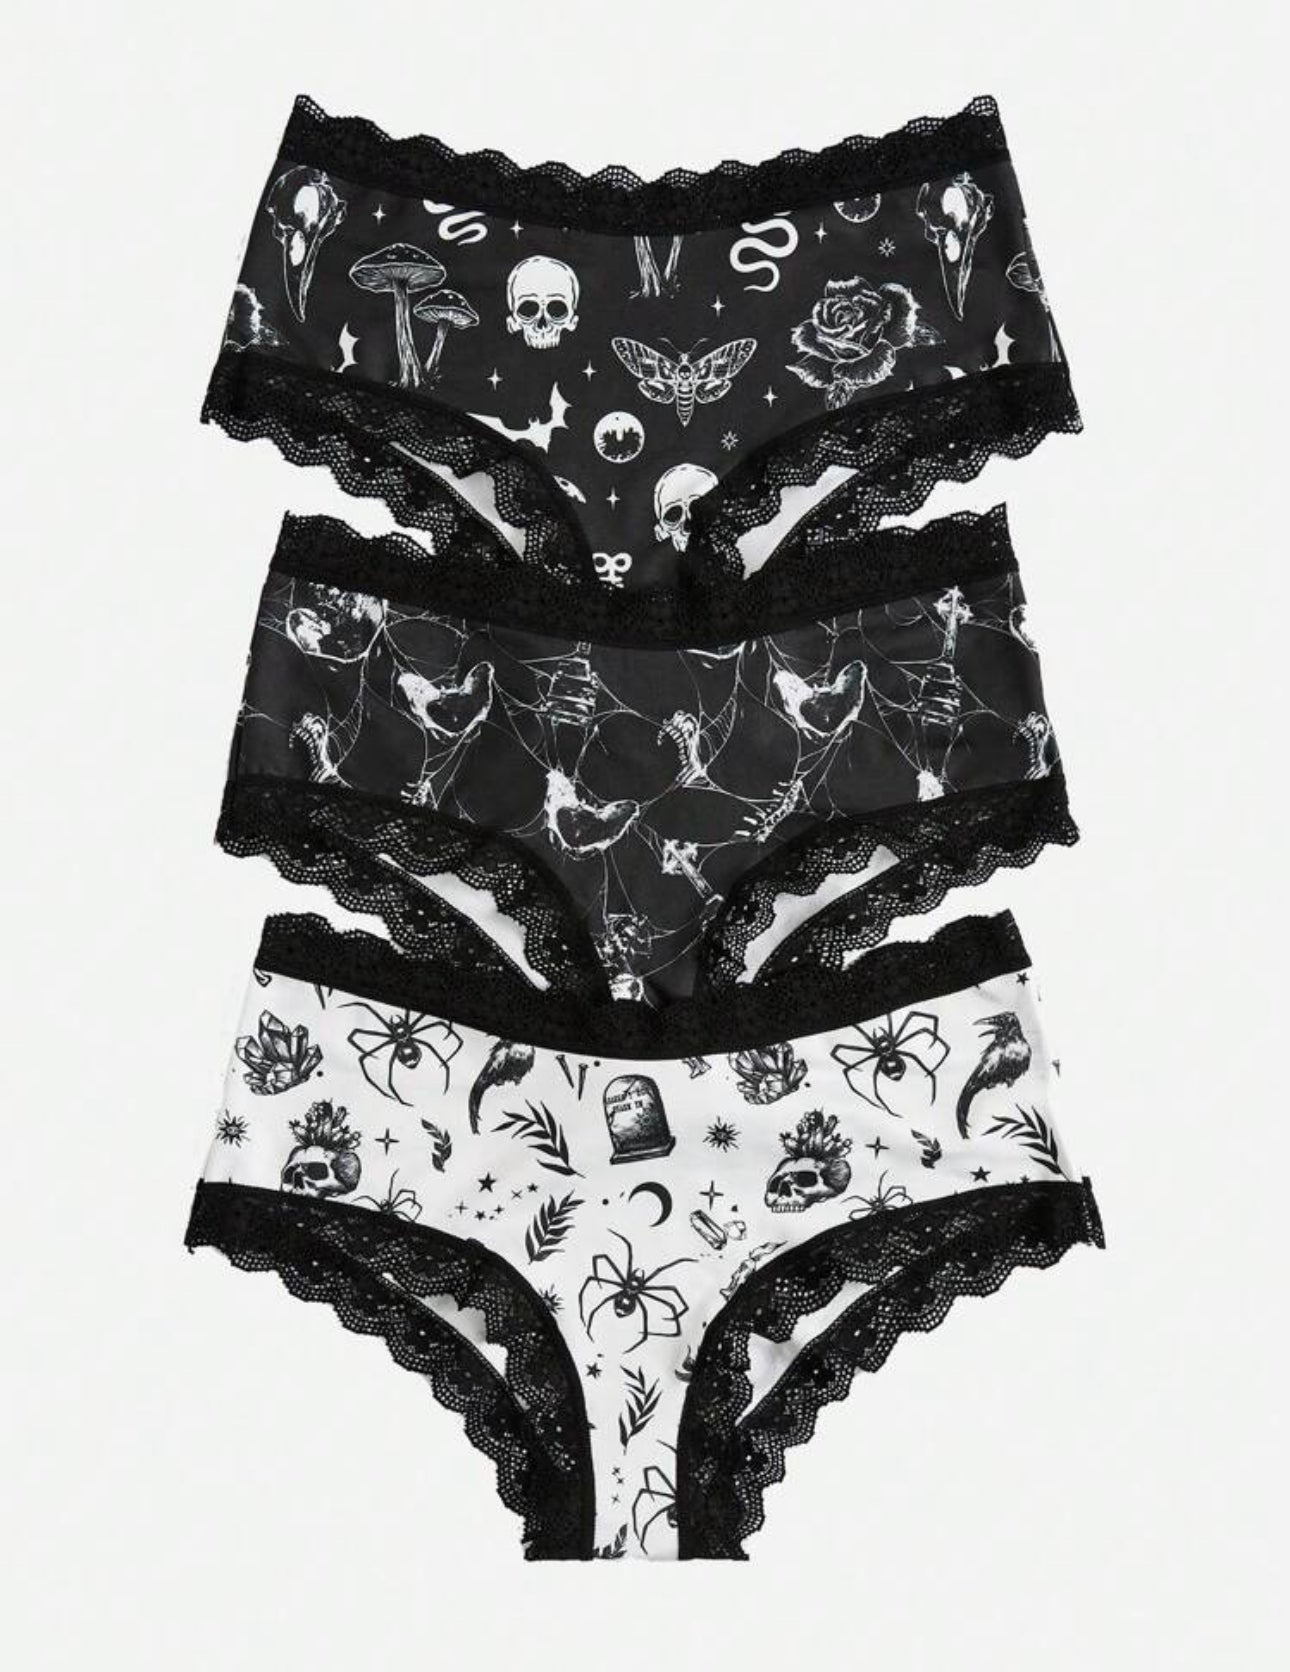 Goth 3-Pack Skull Print Contrast Lace Low Rise Panty Set